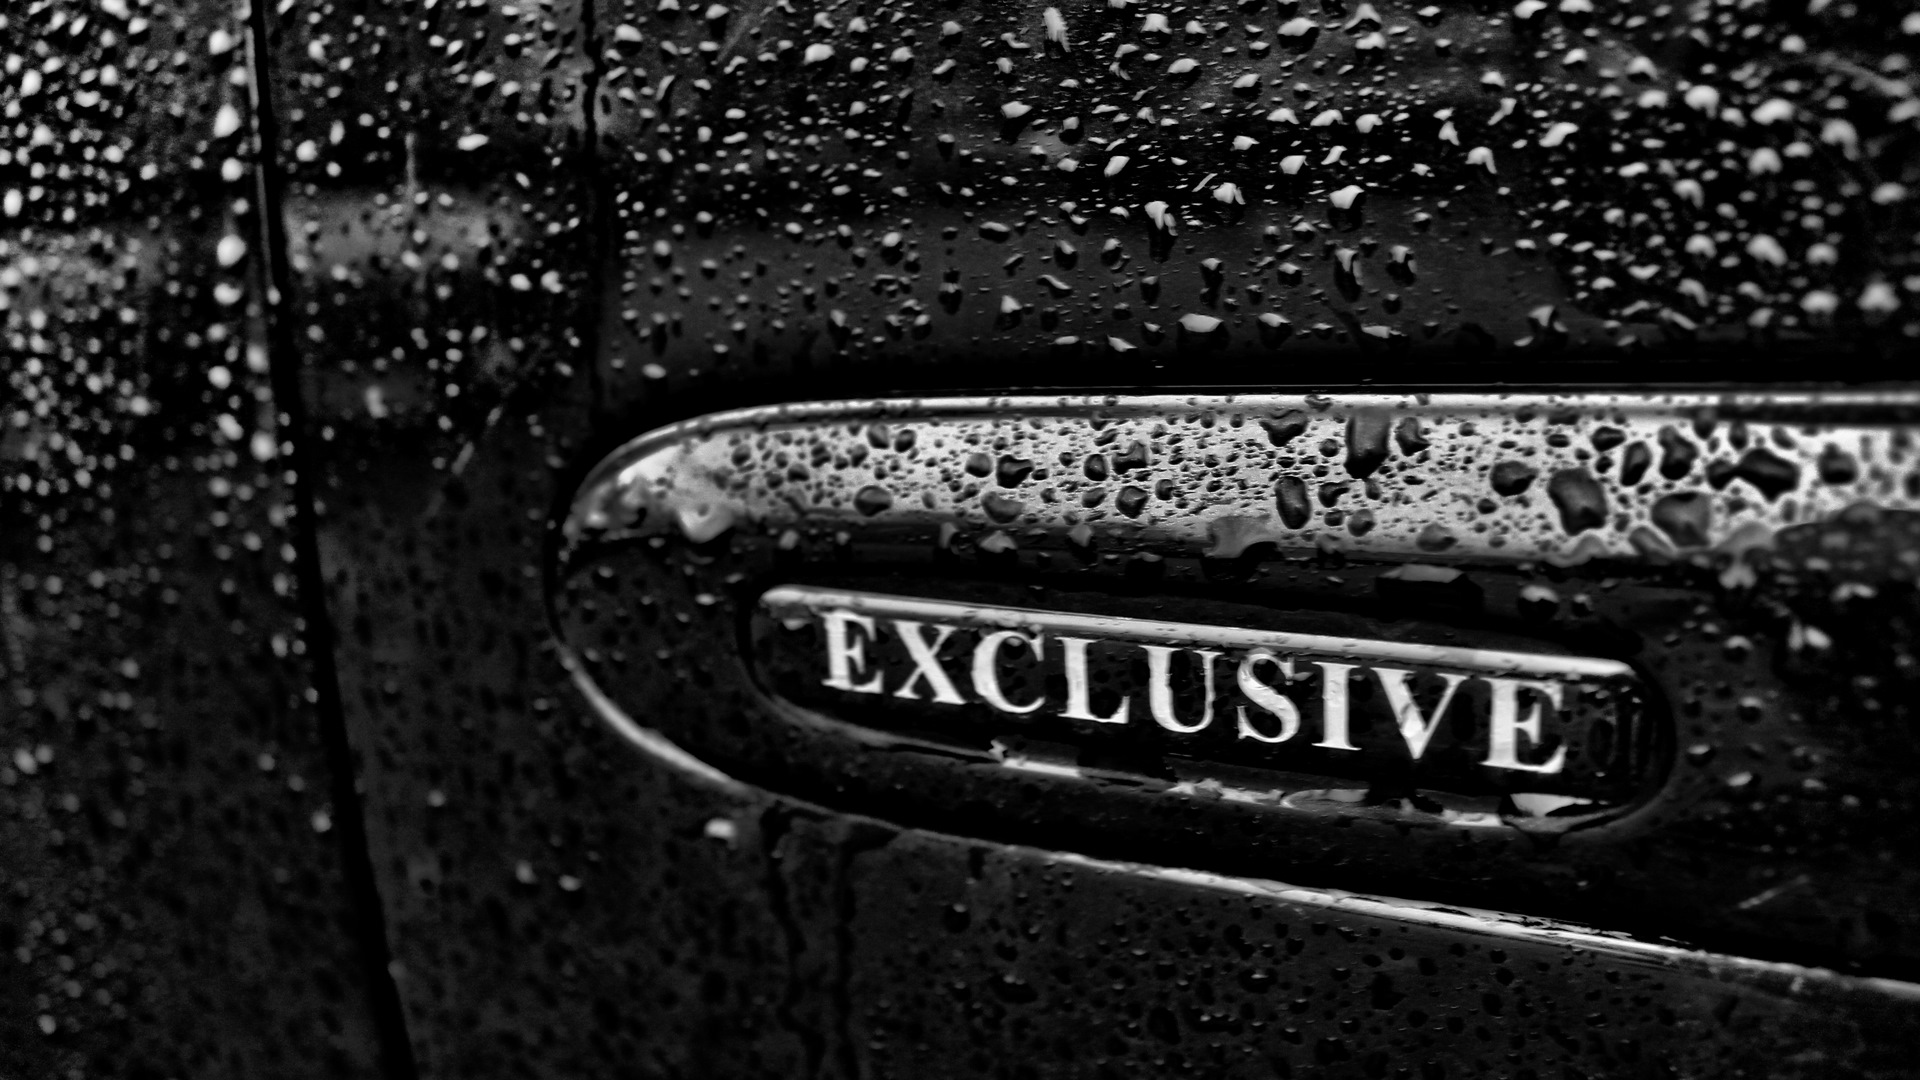 Only exclusive